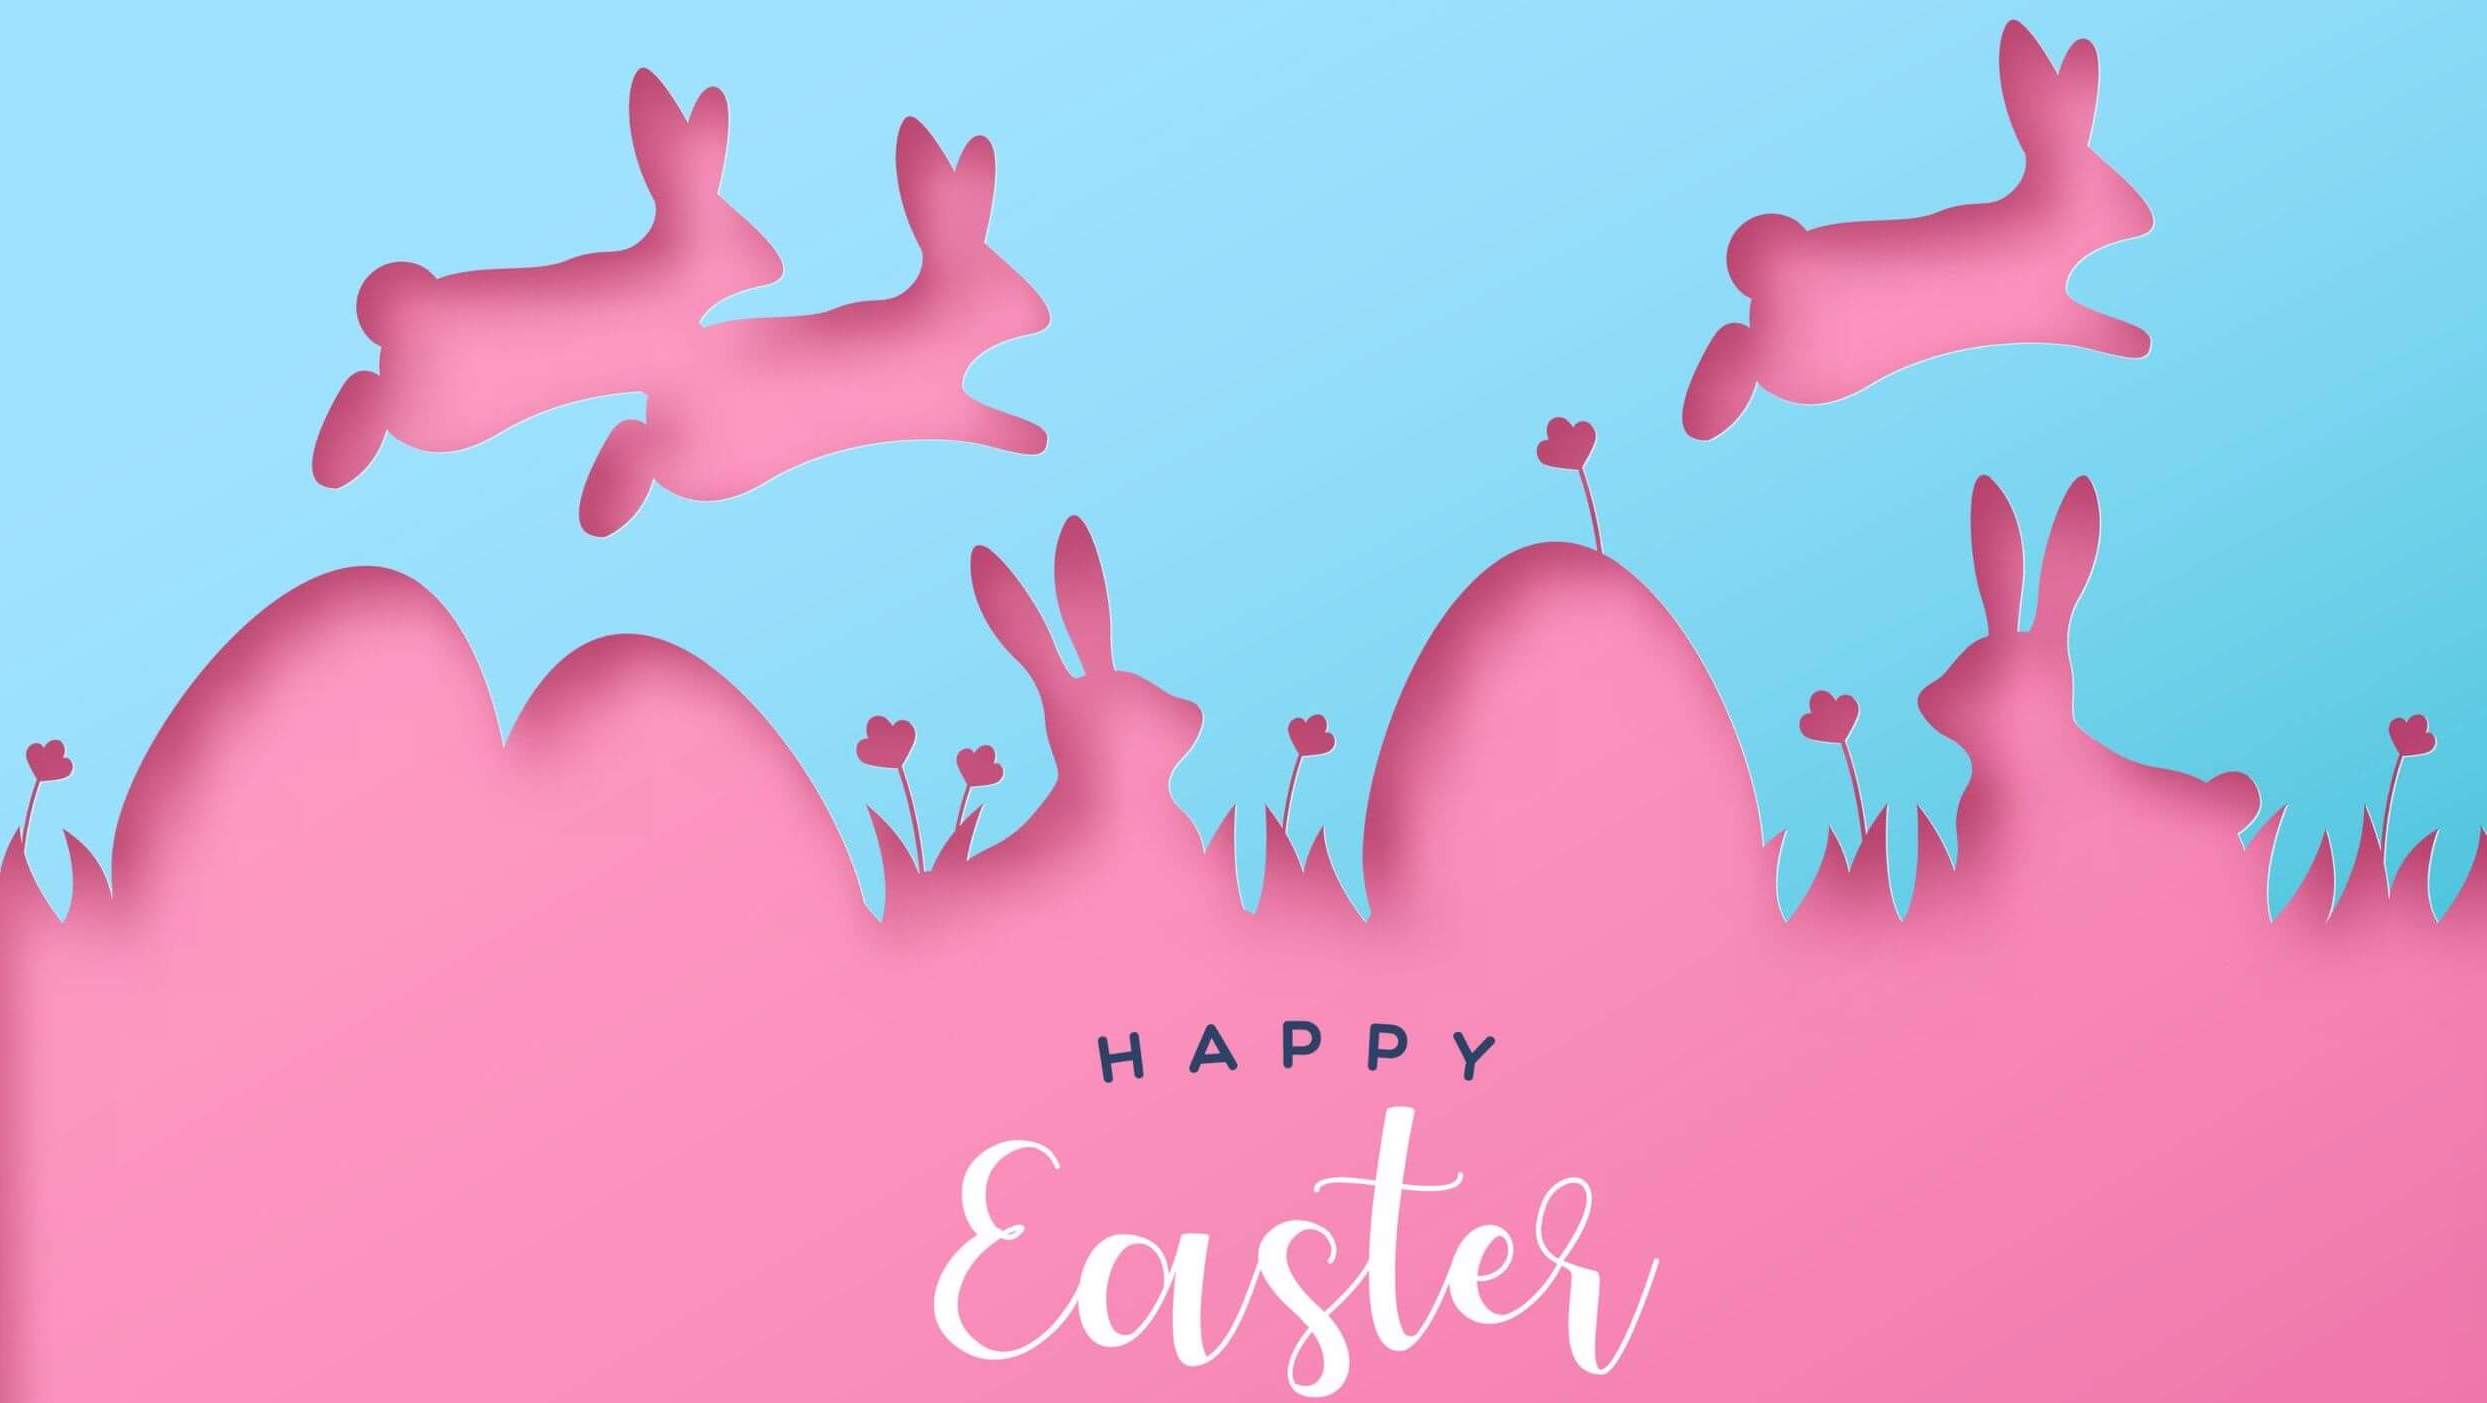 75 ‘Happy Easter’ Wishes, Messages, and Quotes for 2023